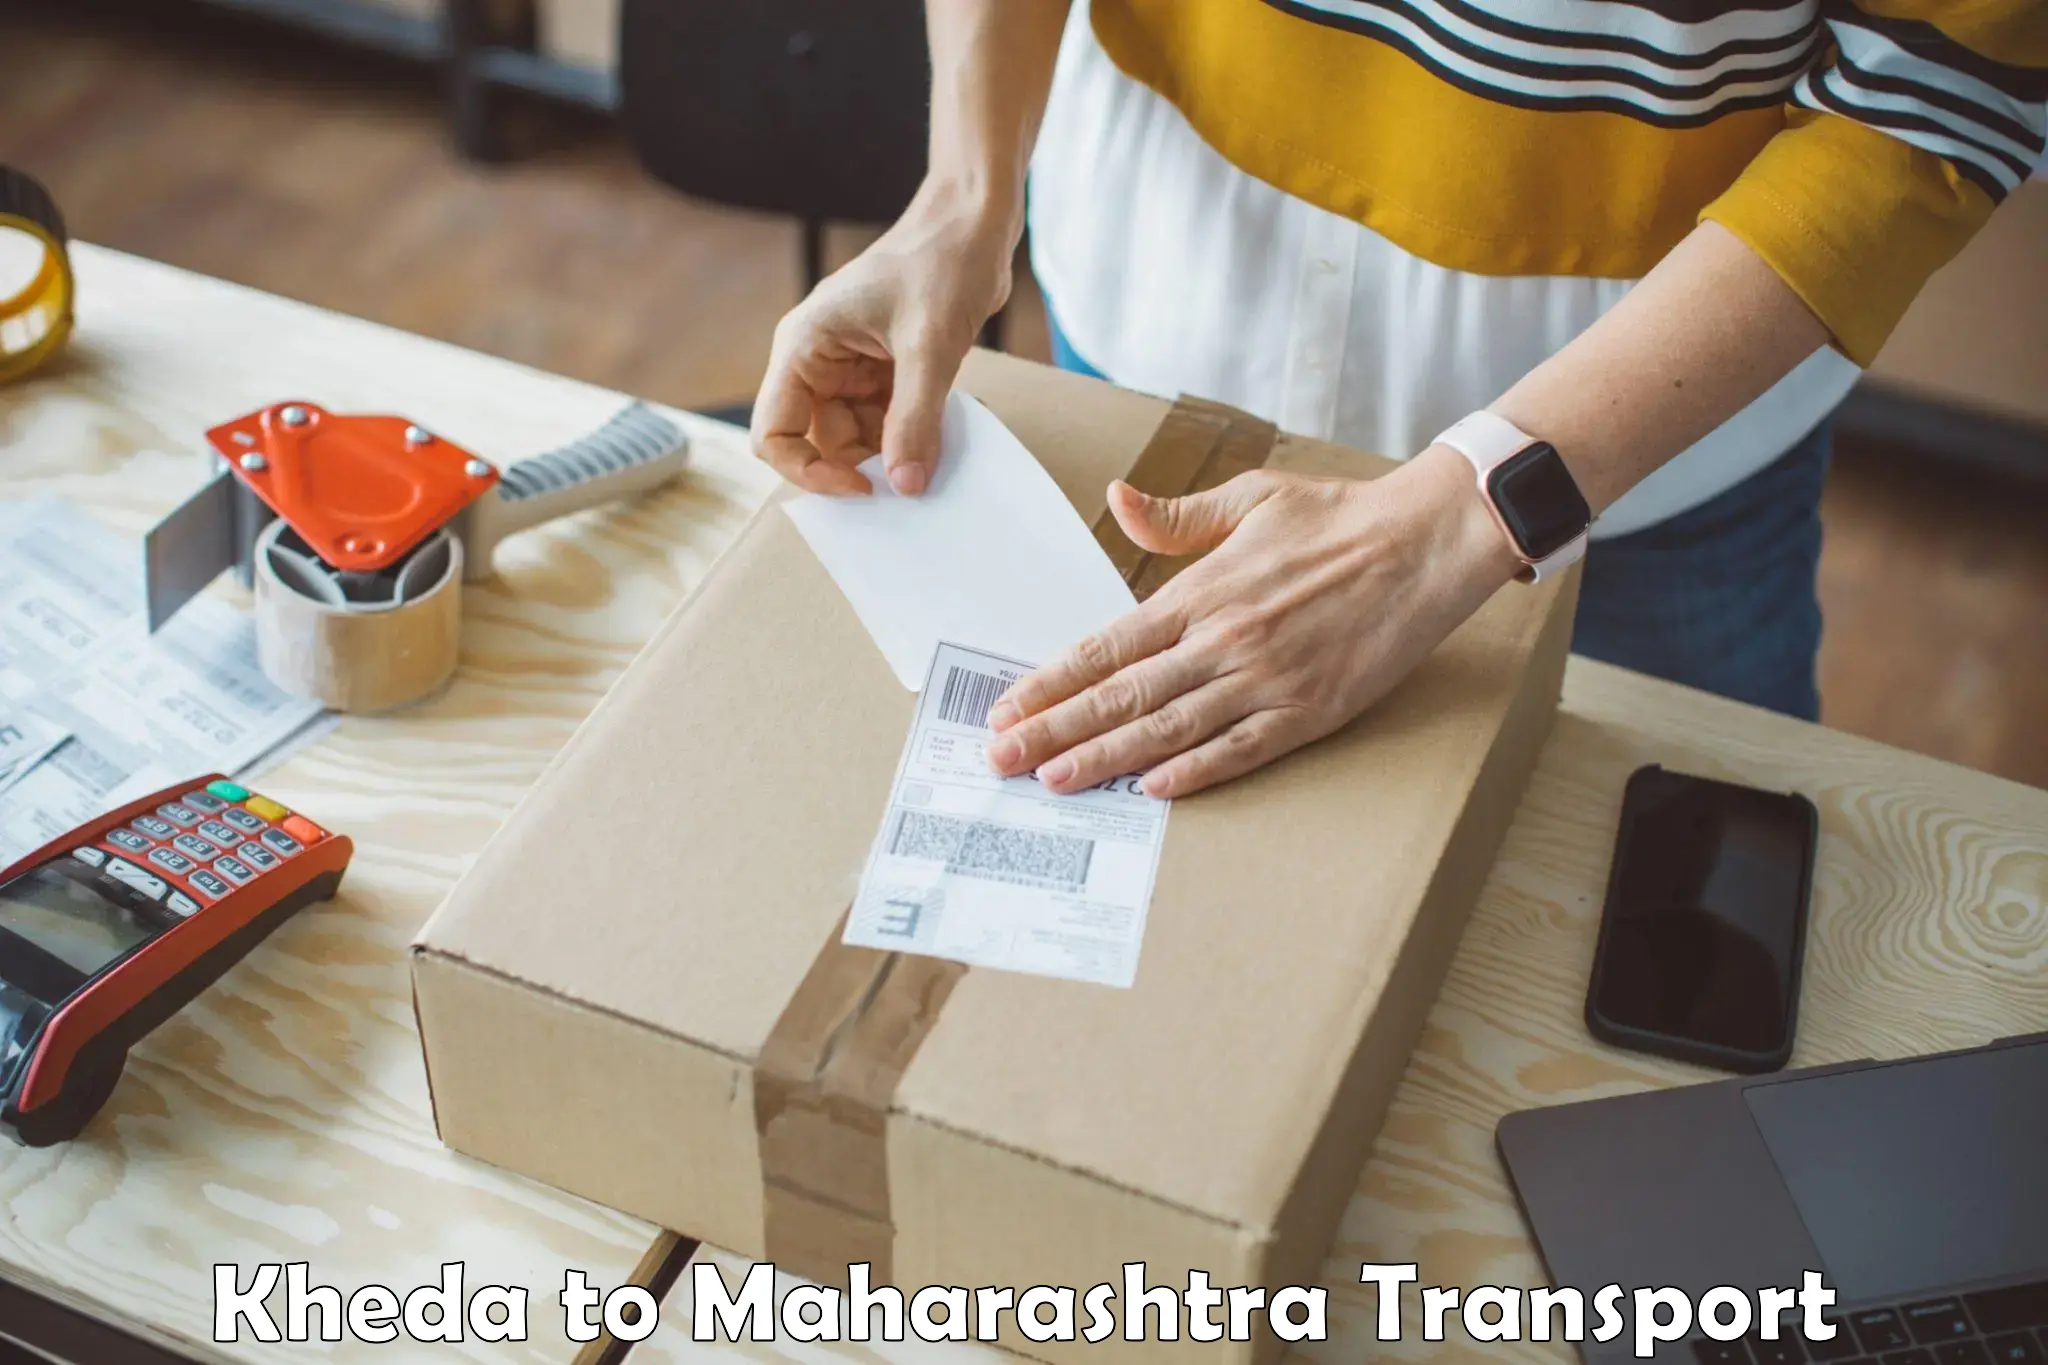 Goods delivery service Kheda to Thane